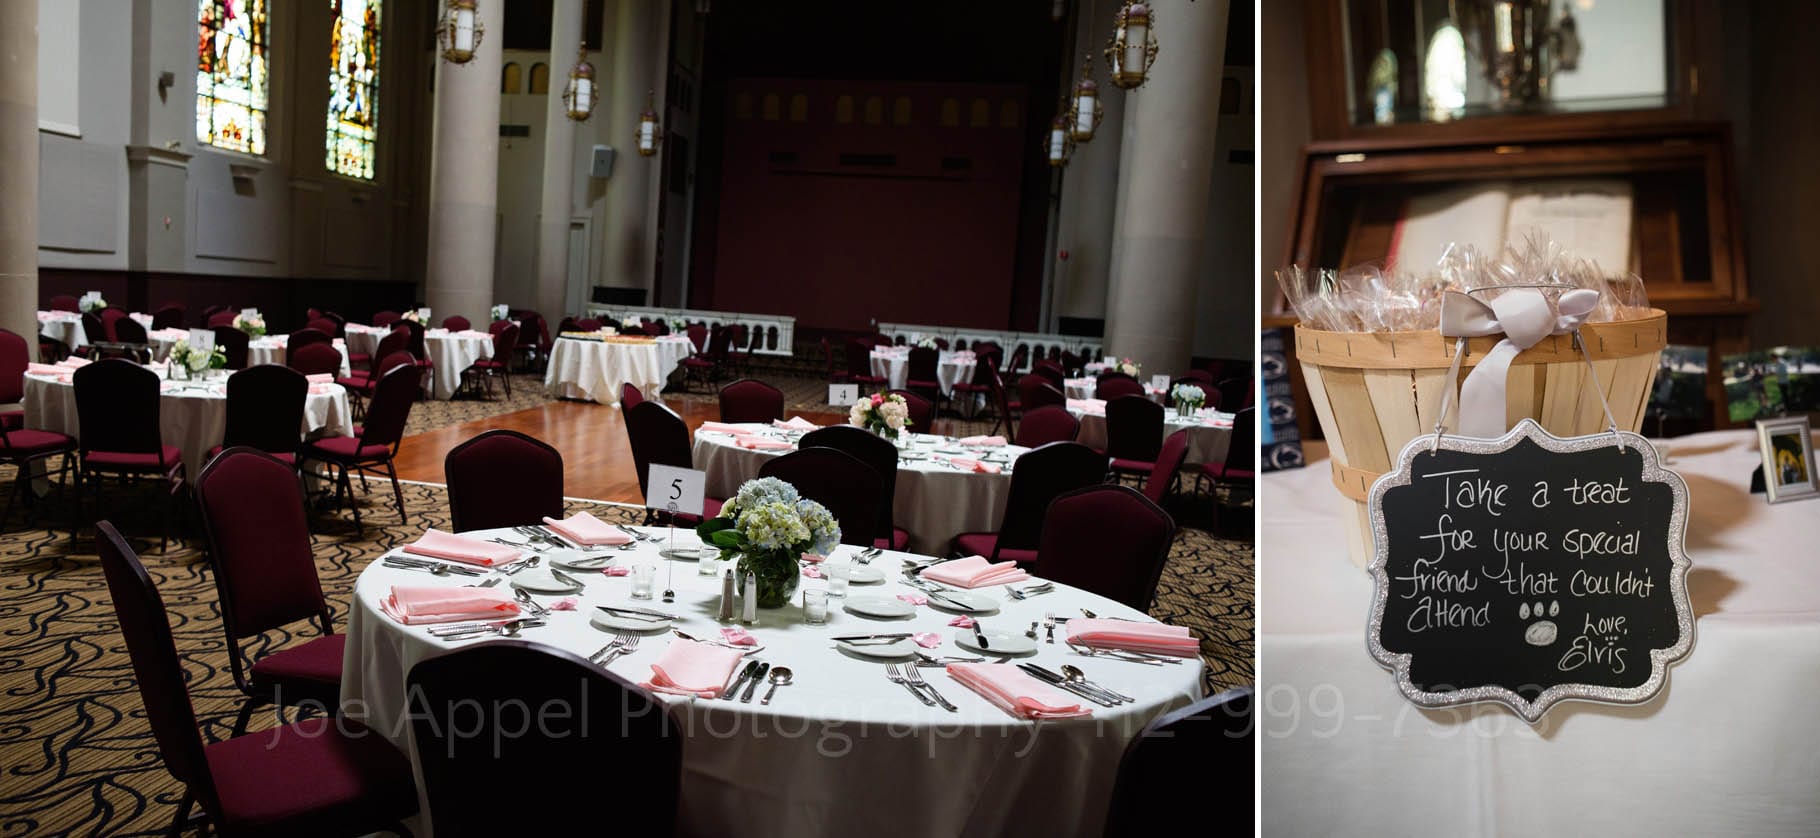 Interior photos of the Pittsburgh Grand Hall Wedding include a group of tables and a basket filled with dog treats directing guests to take some home for their pets.